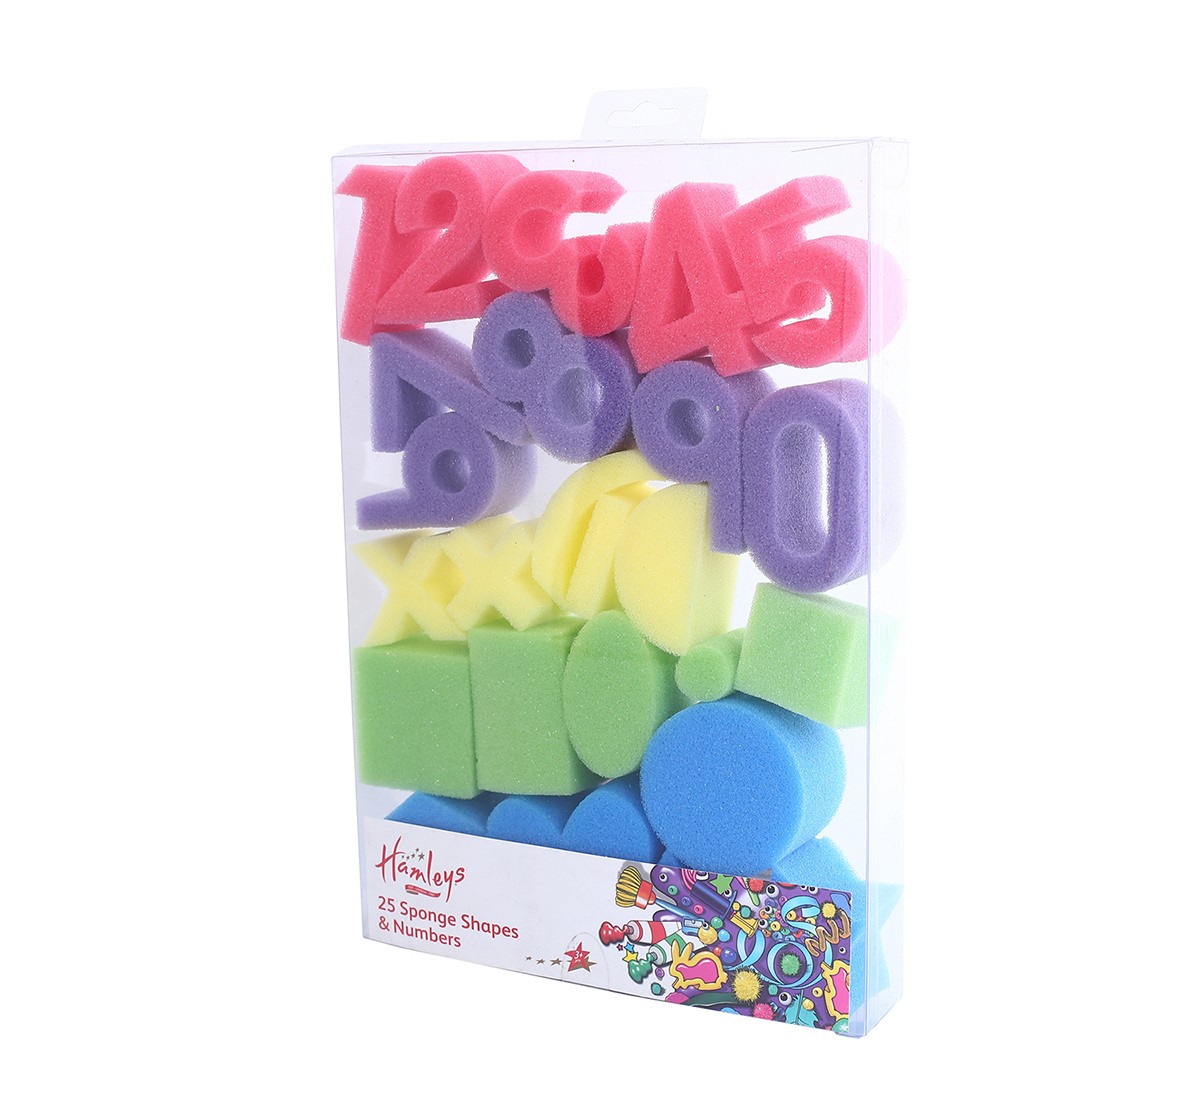 Hamleys Number And Shapes Sponges School Stationery for Kids age 3Y+ 